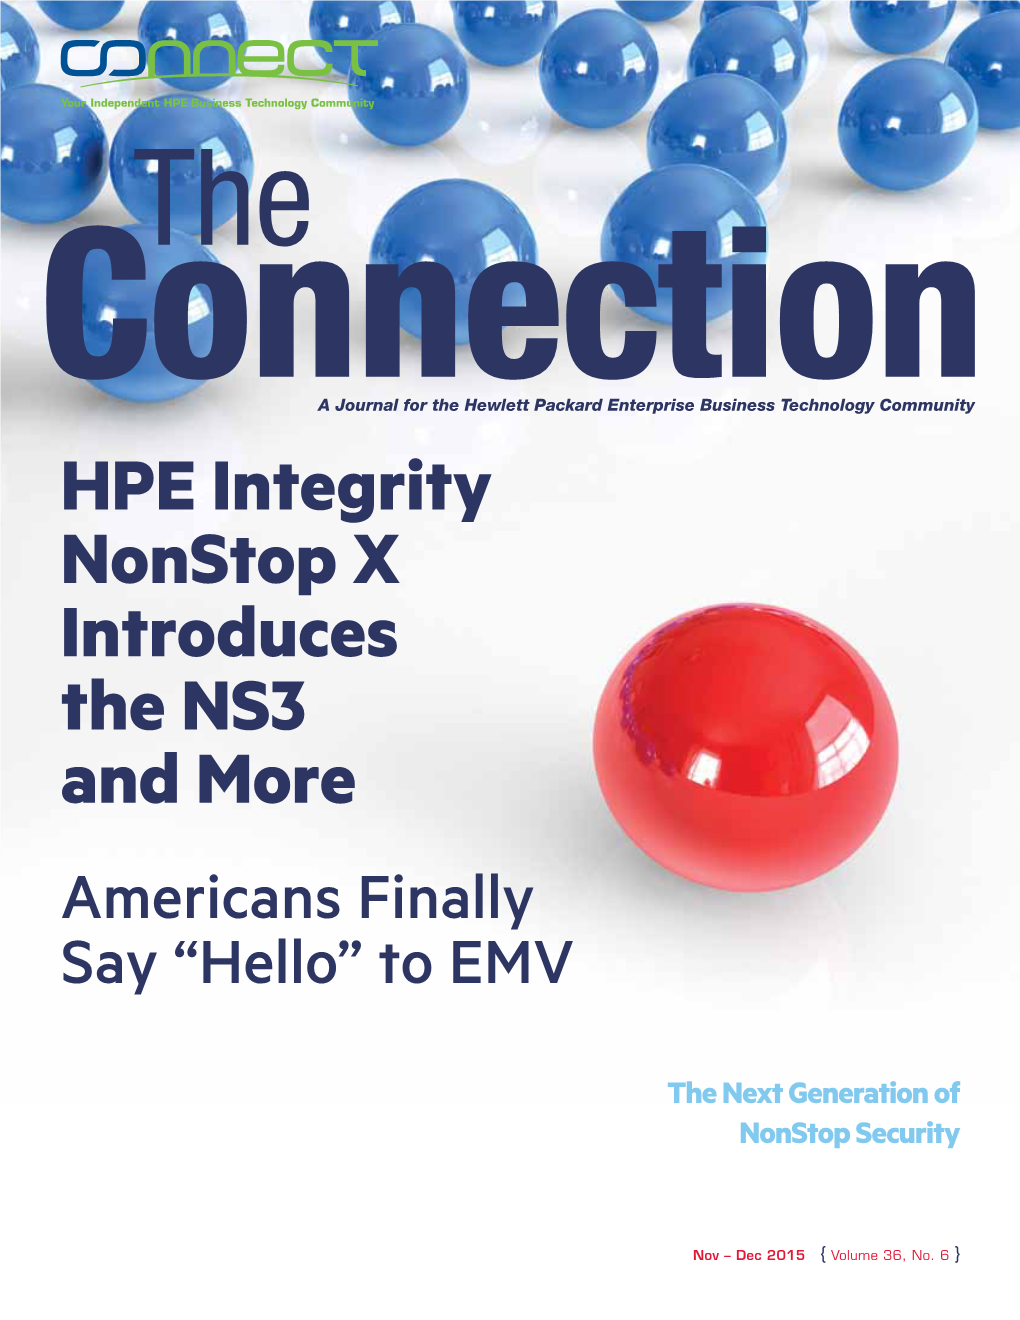 HPE Integrity Nonstop X Introduces the NS3 and More Americans Finally Say “Hello” to EMV